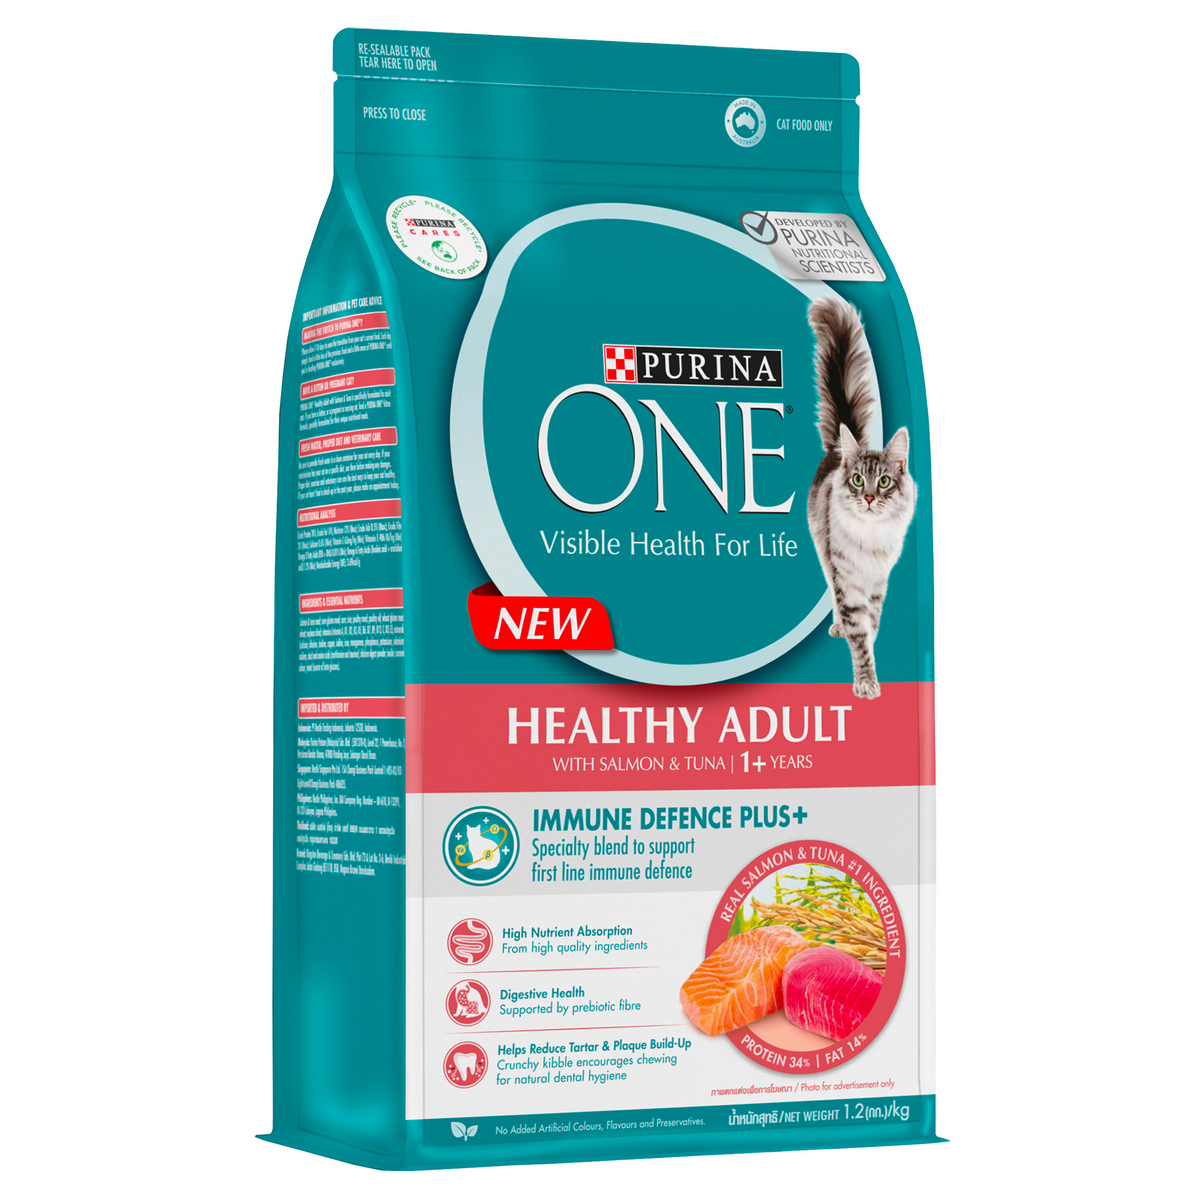 Purina One Healthy Adult Catfood With Salmon & Tuna For 1+ Years, 1.2 kg